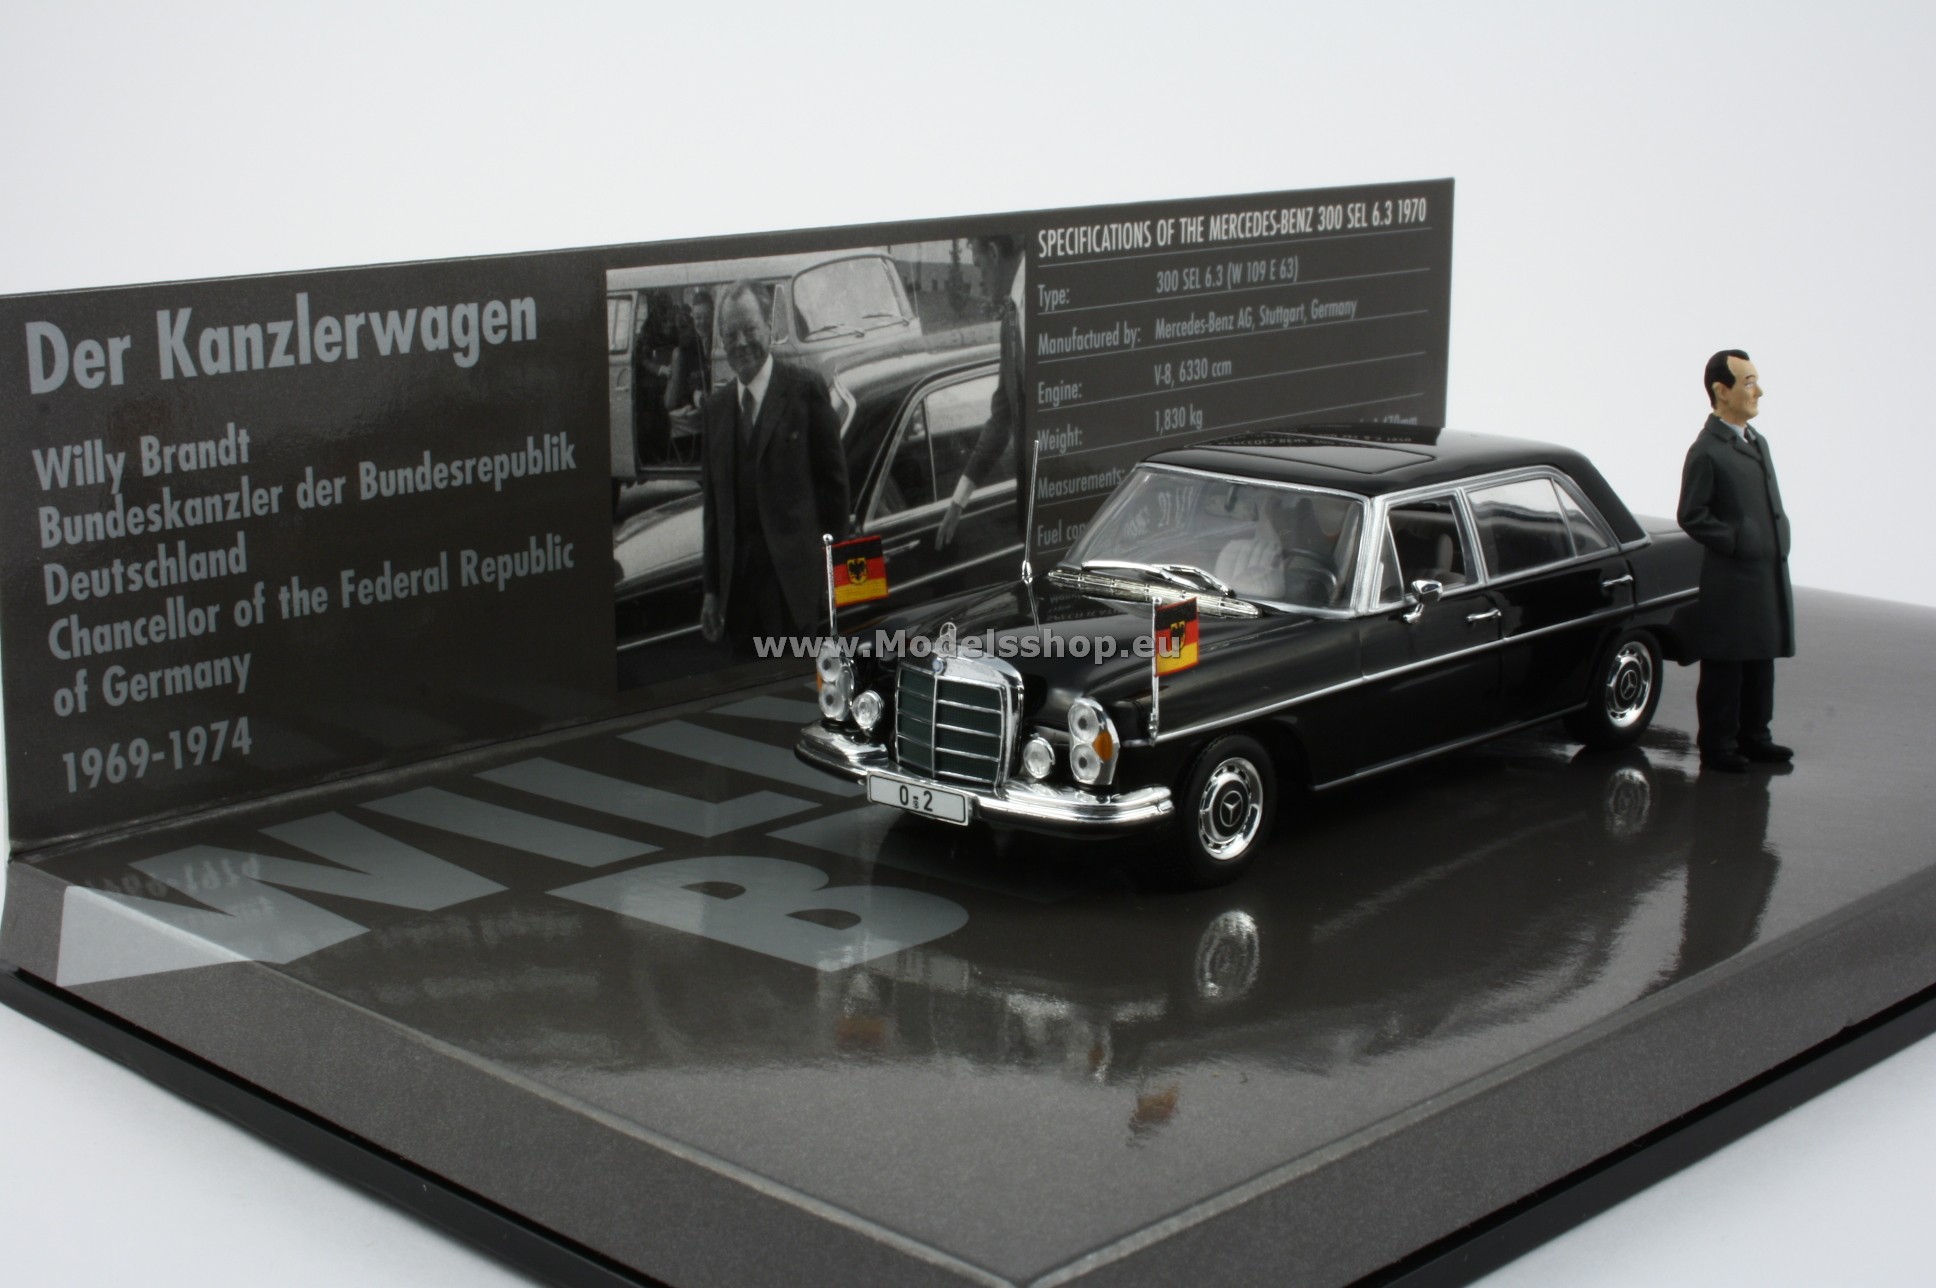 MERCEDES-BENZ 300 SEL 6.3 (W109) - 1970 - 'WILLY BRANDT' - WITH FIGURINE